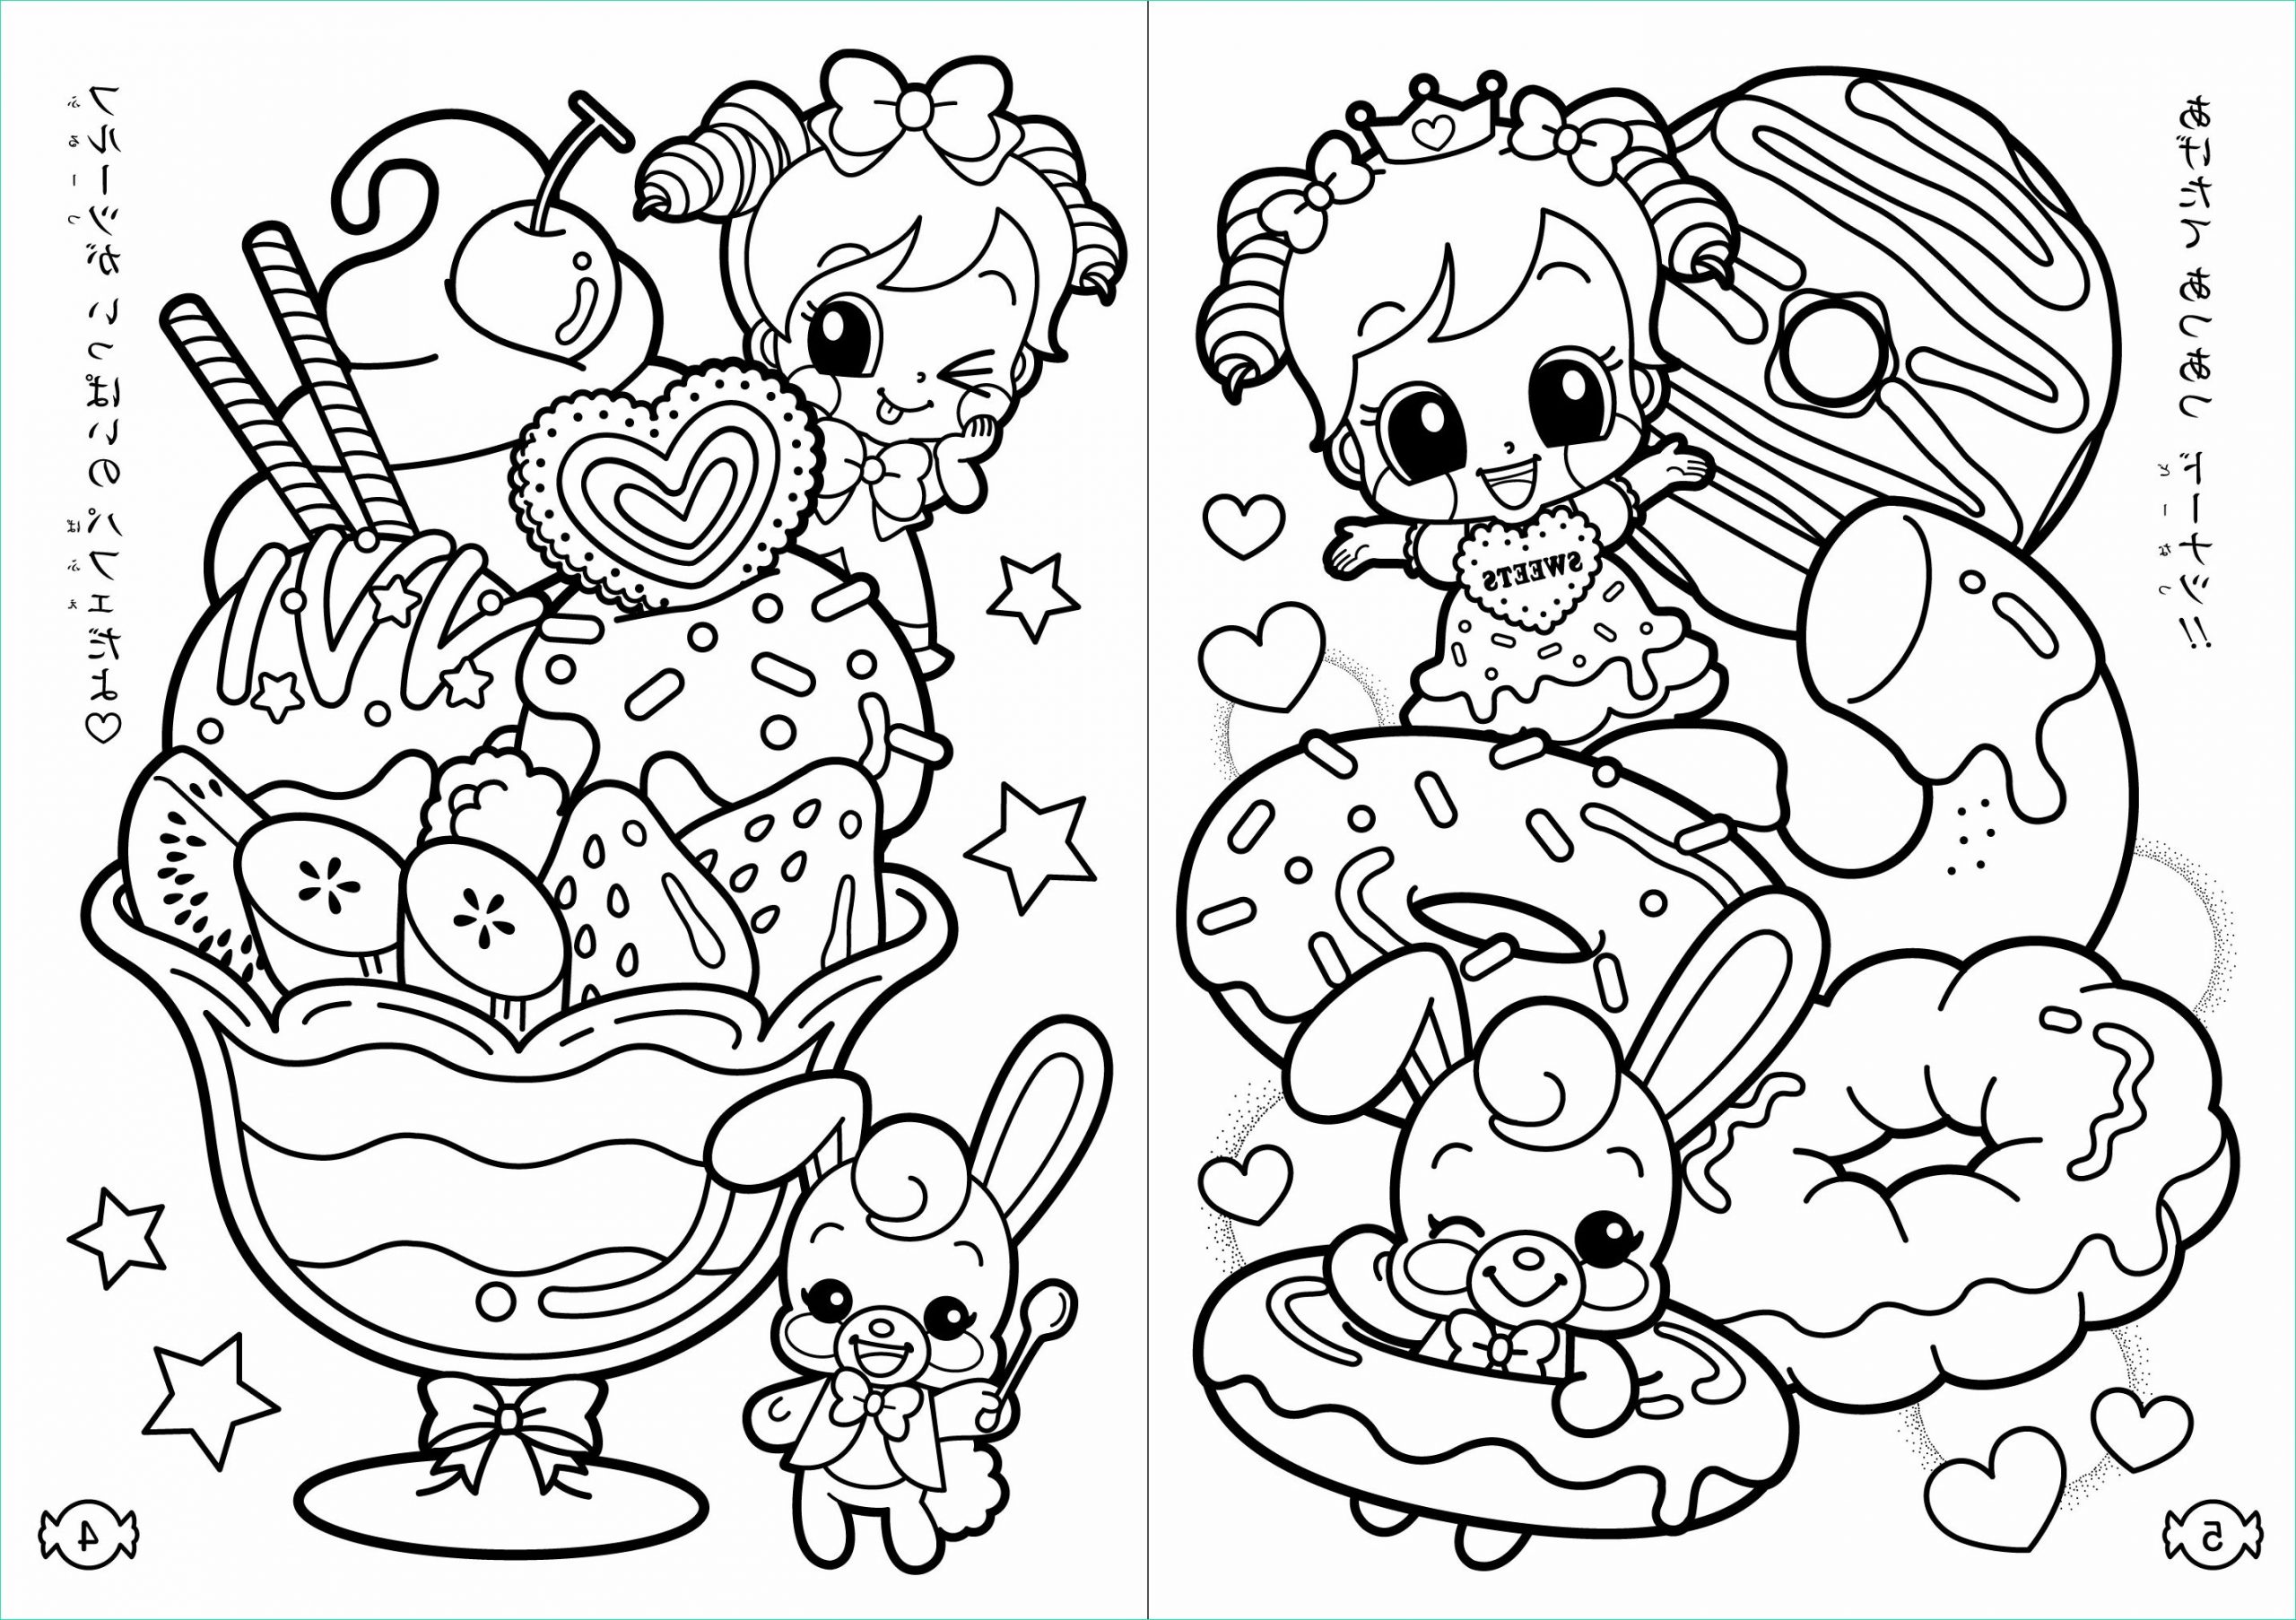 Dessin Kawaii Coloriage Impressionnant Collection Kawaii Coloring Pages at Getcolorings